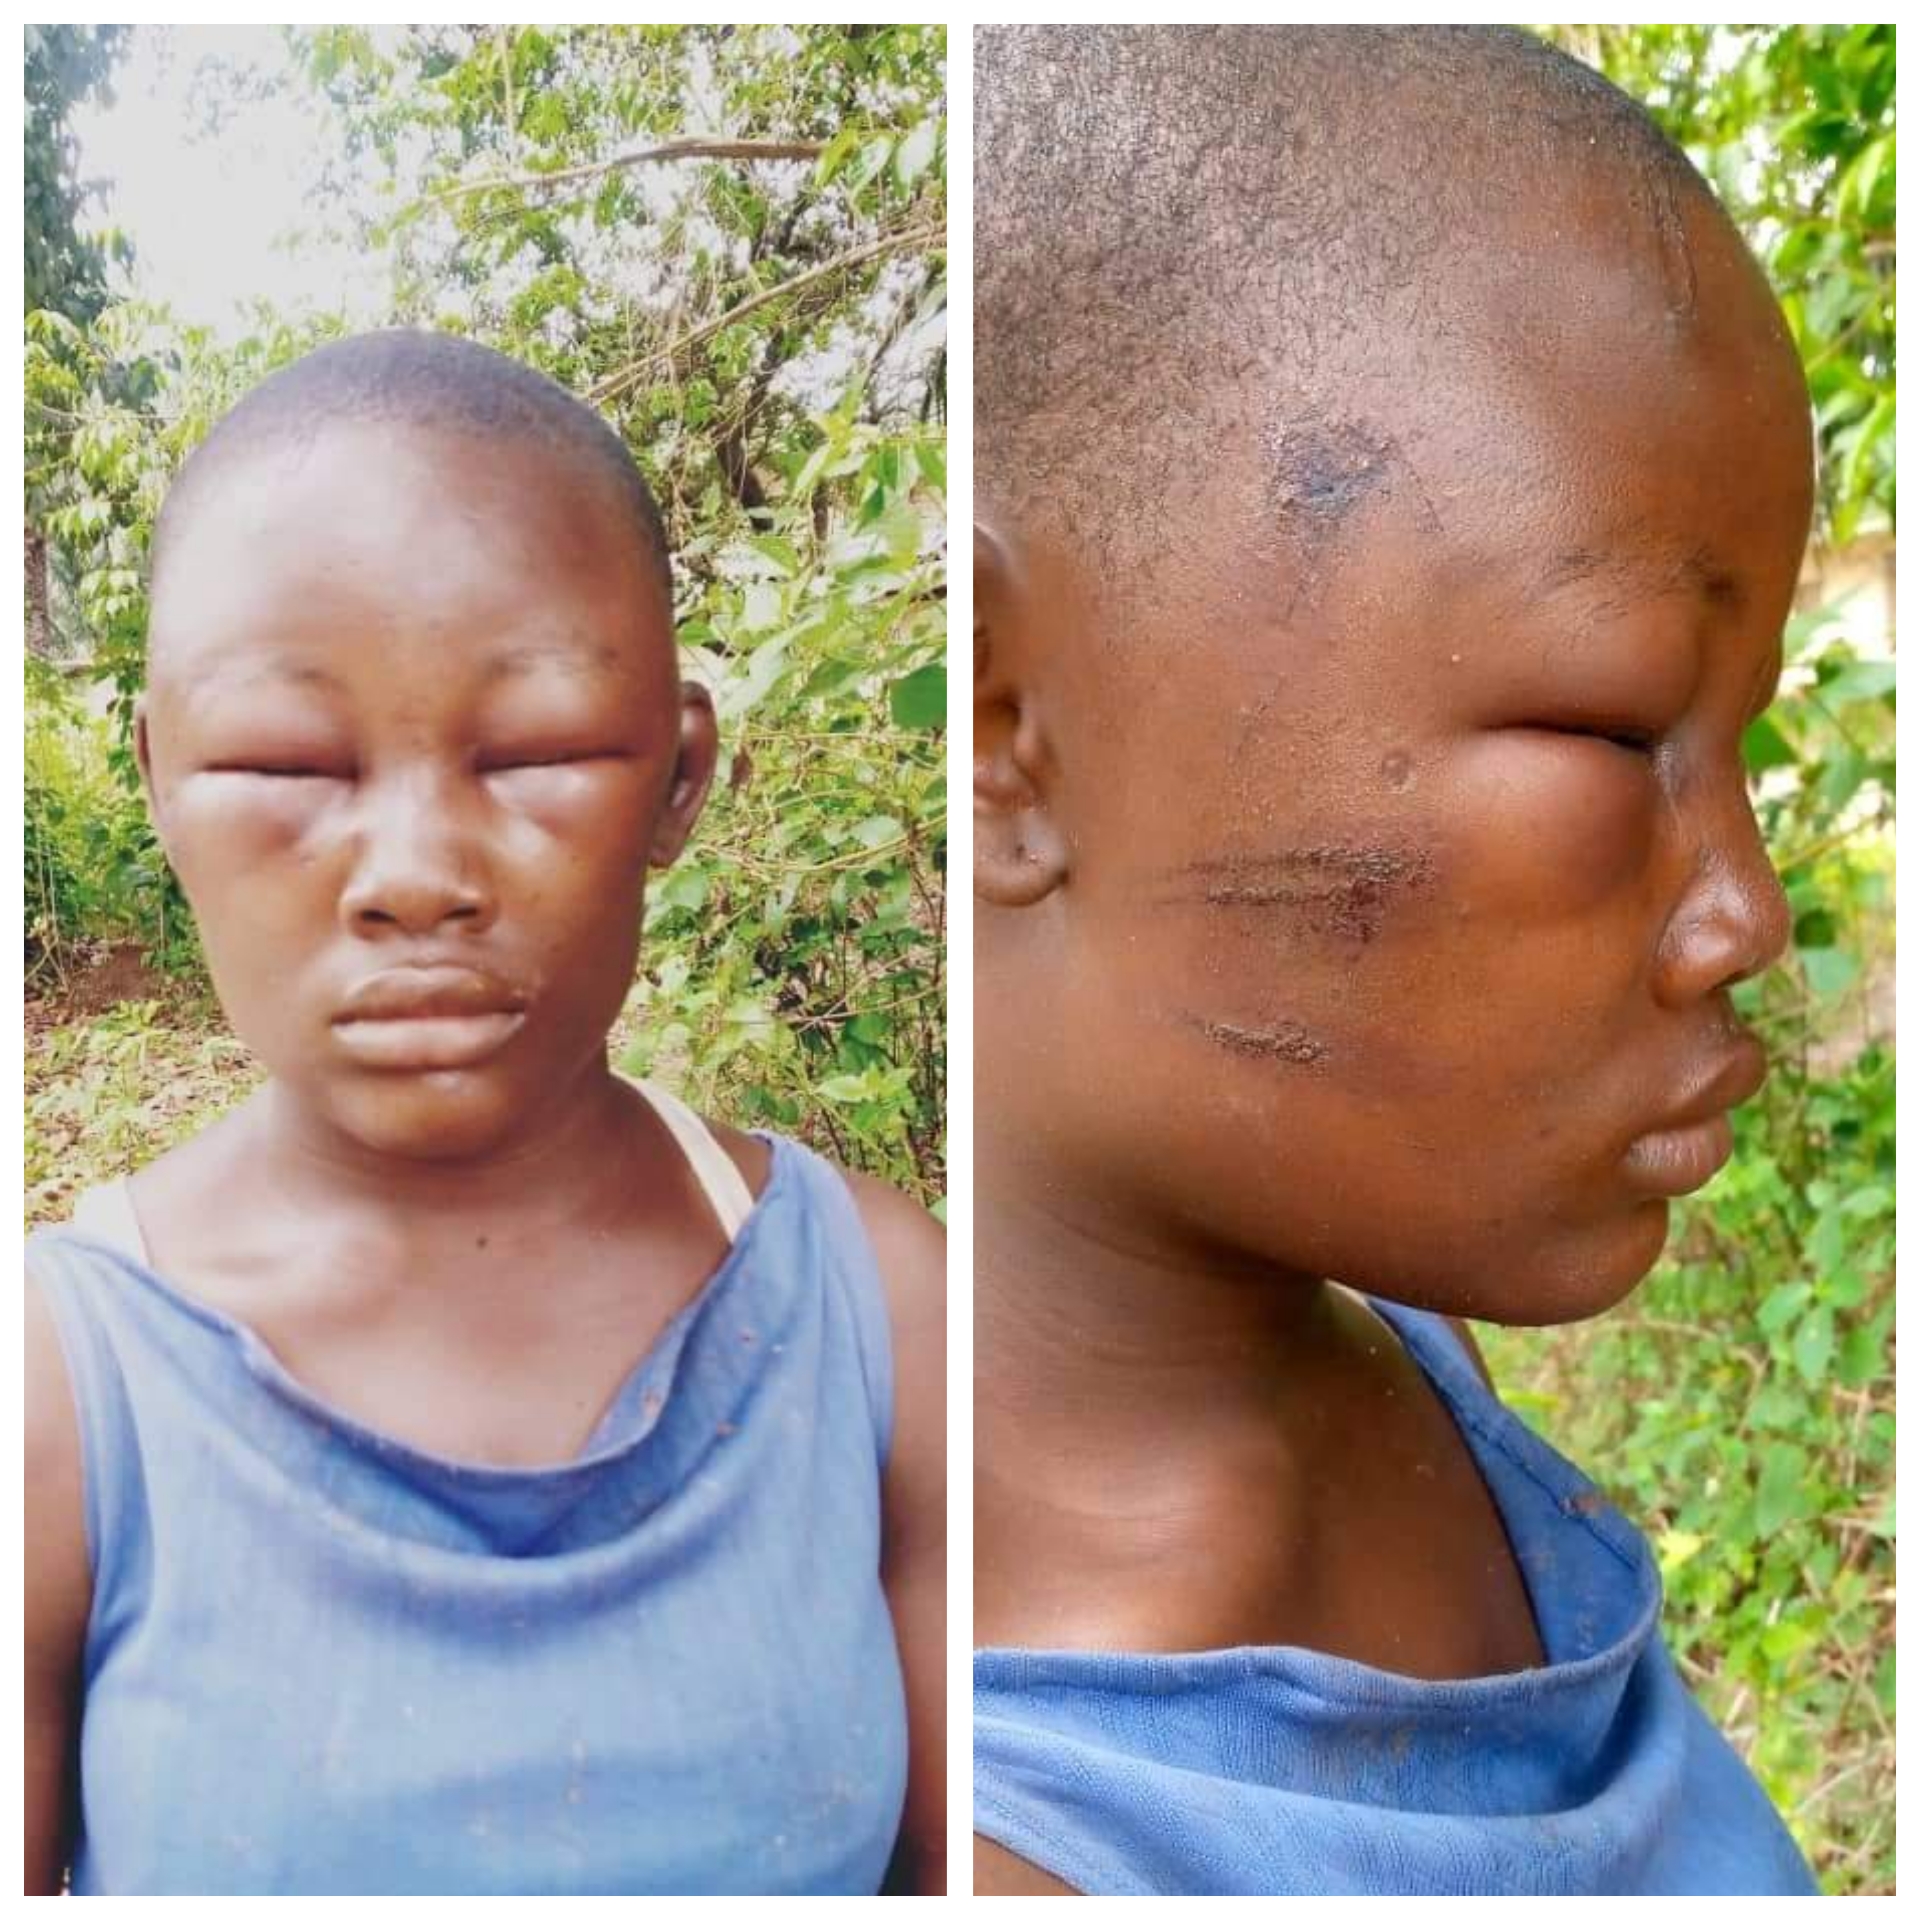 Woman brutalizes her 19-year-old maid in Anambra